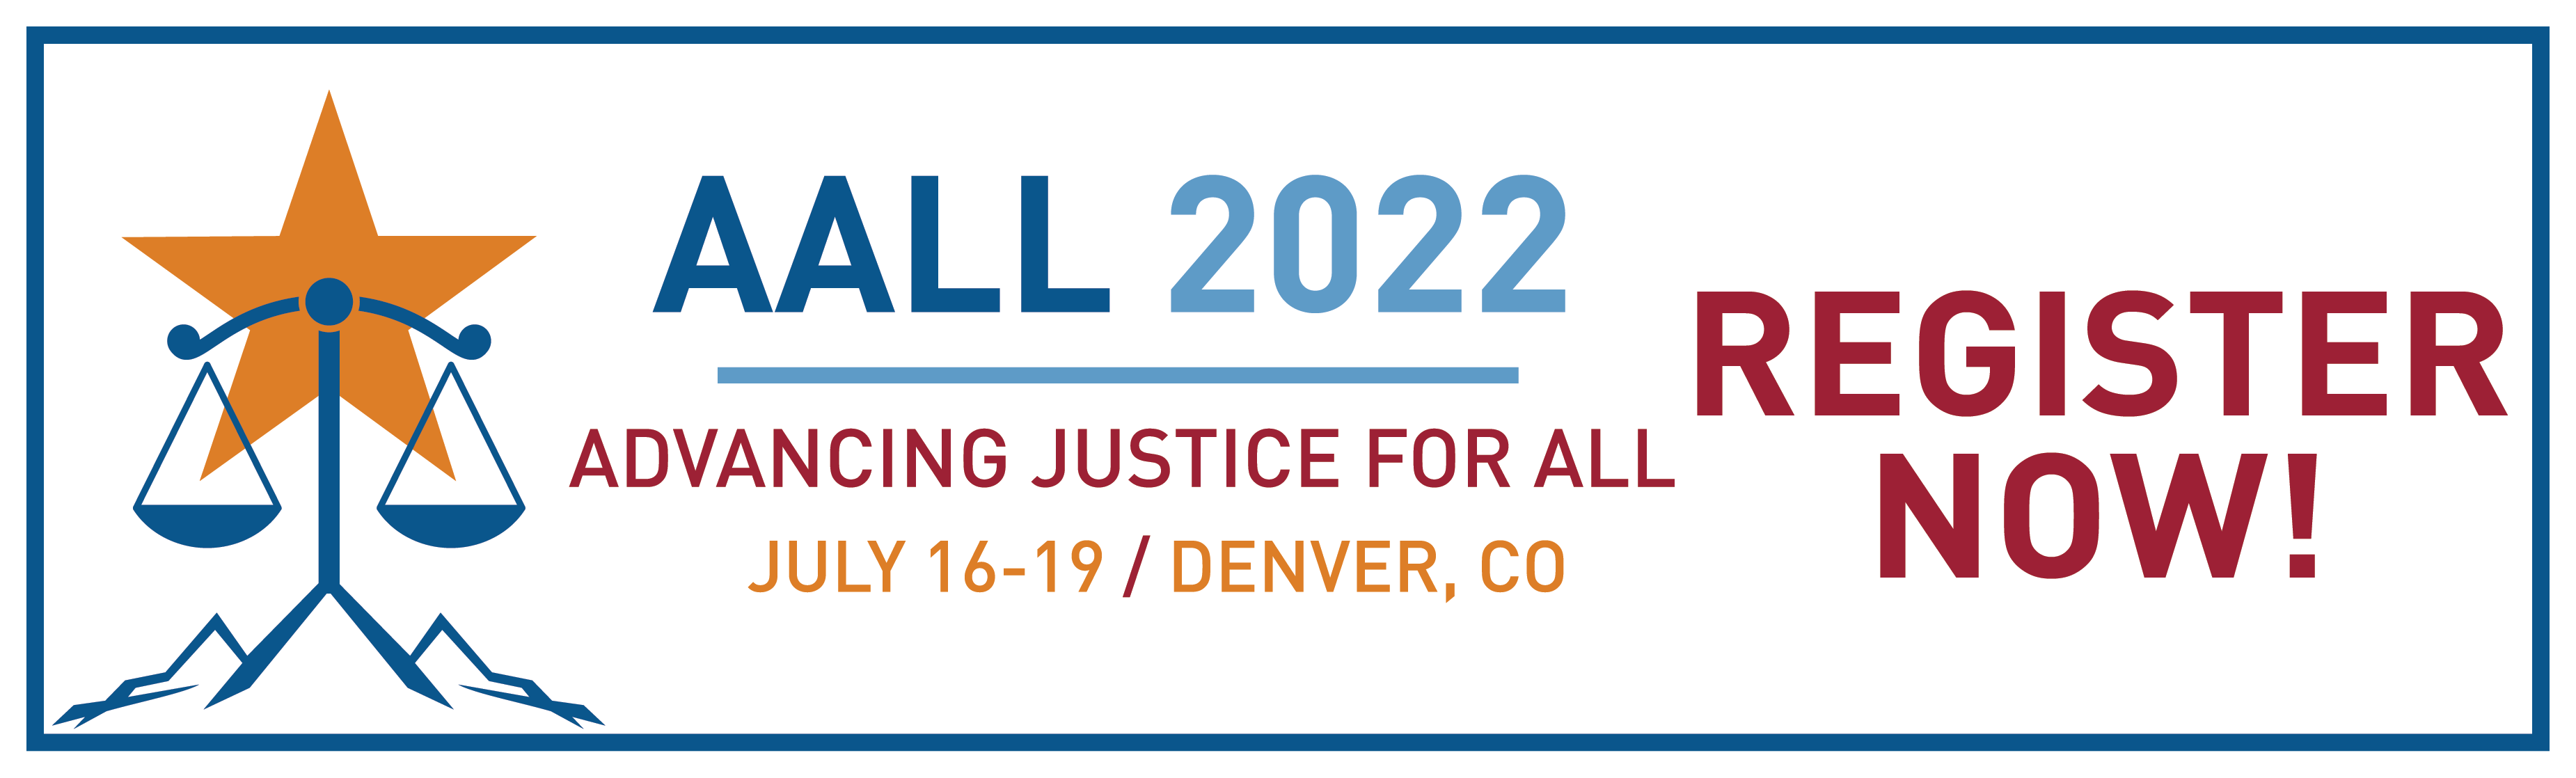 Join AALL in Denver this summer!